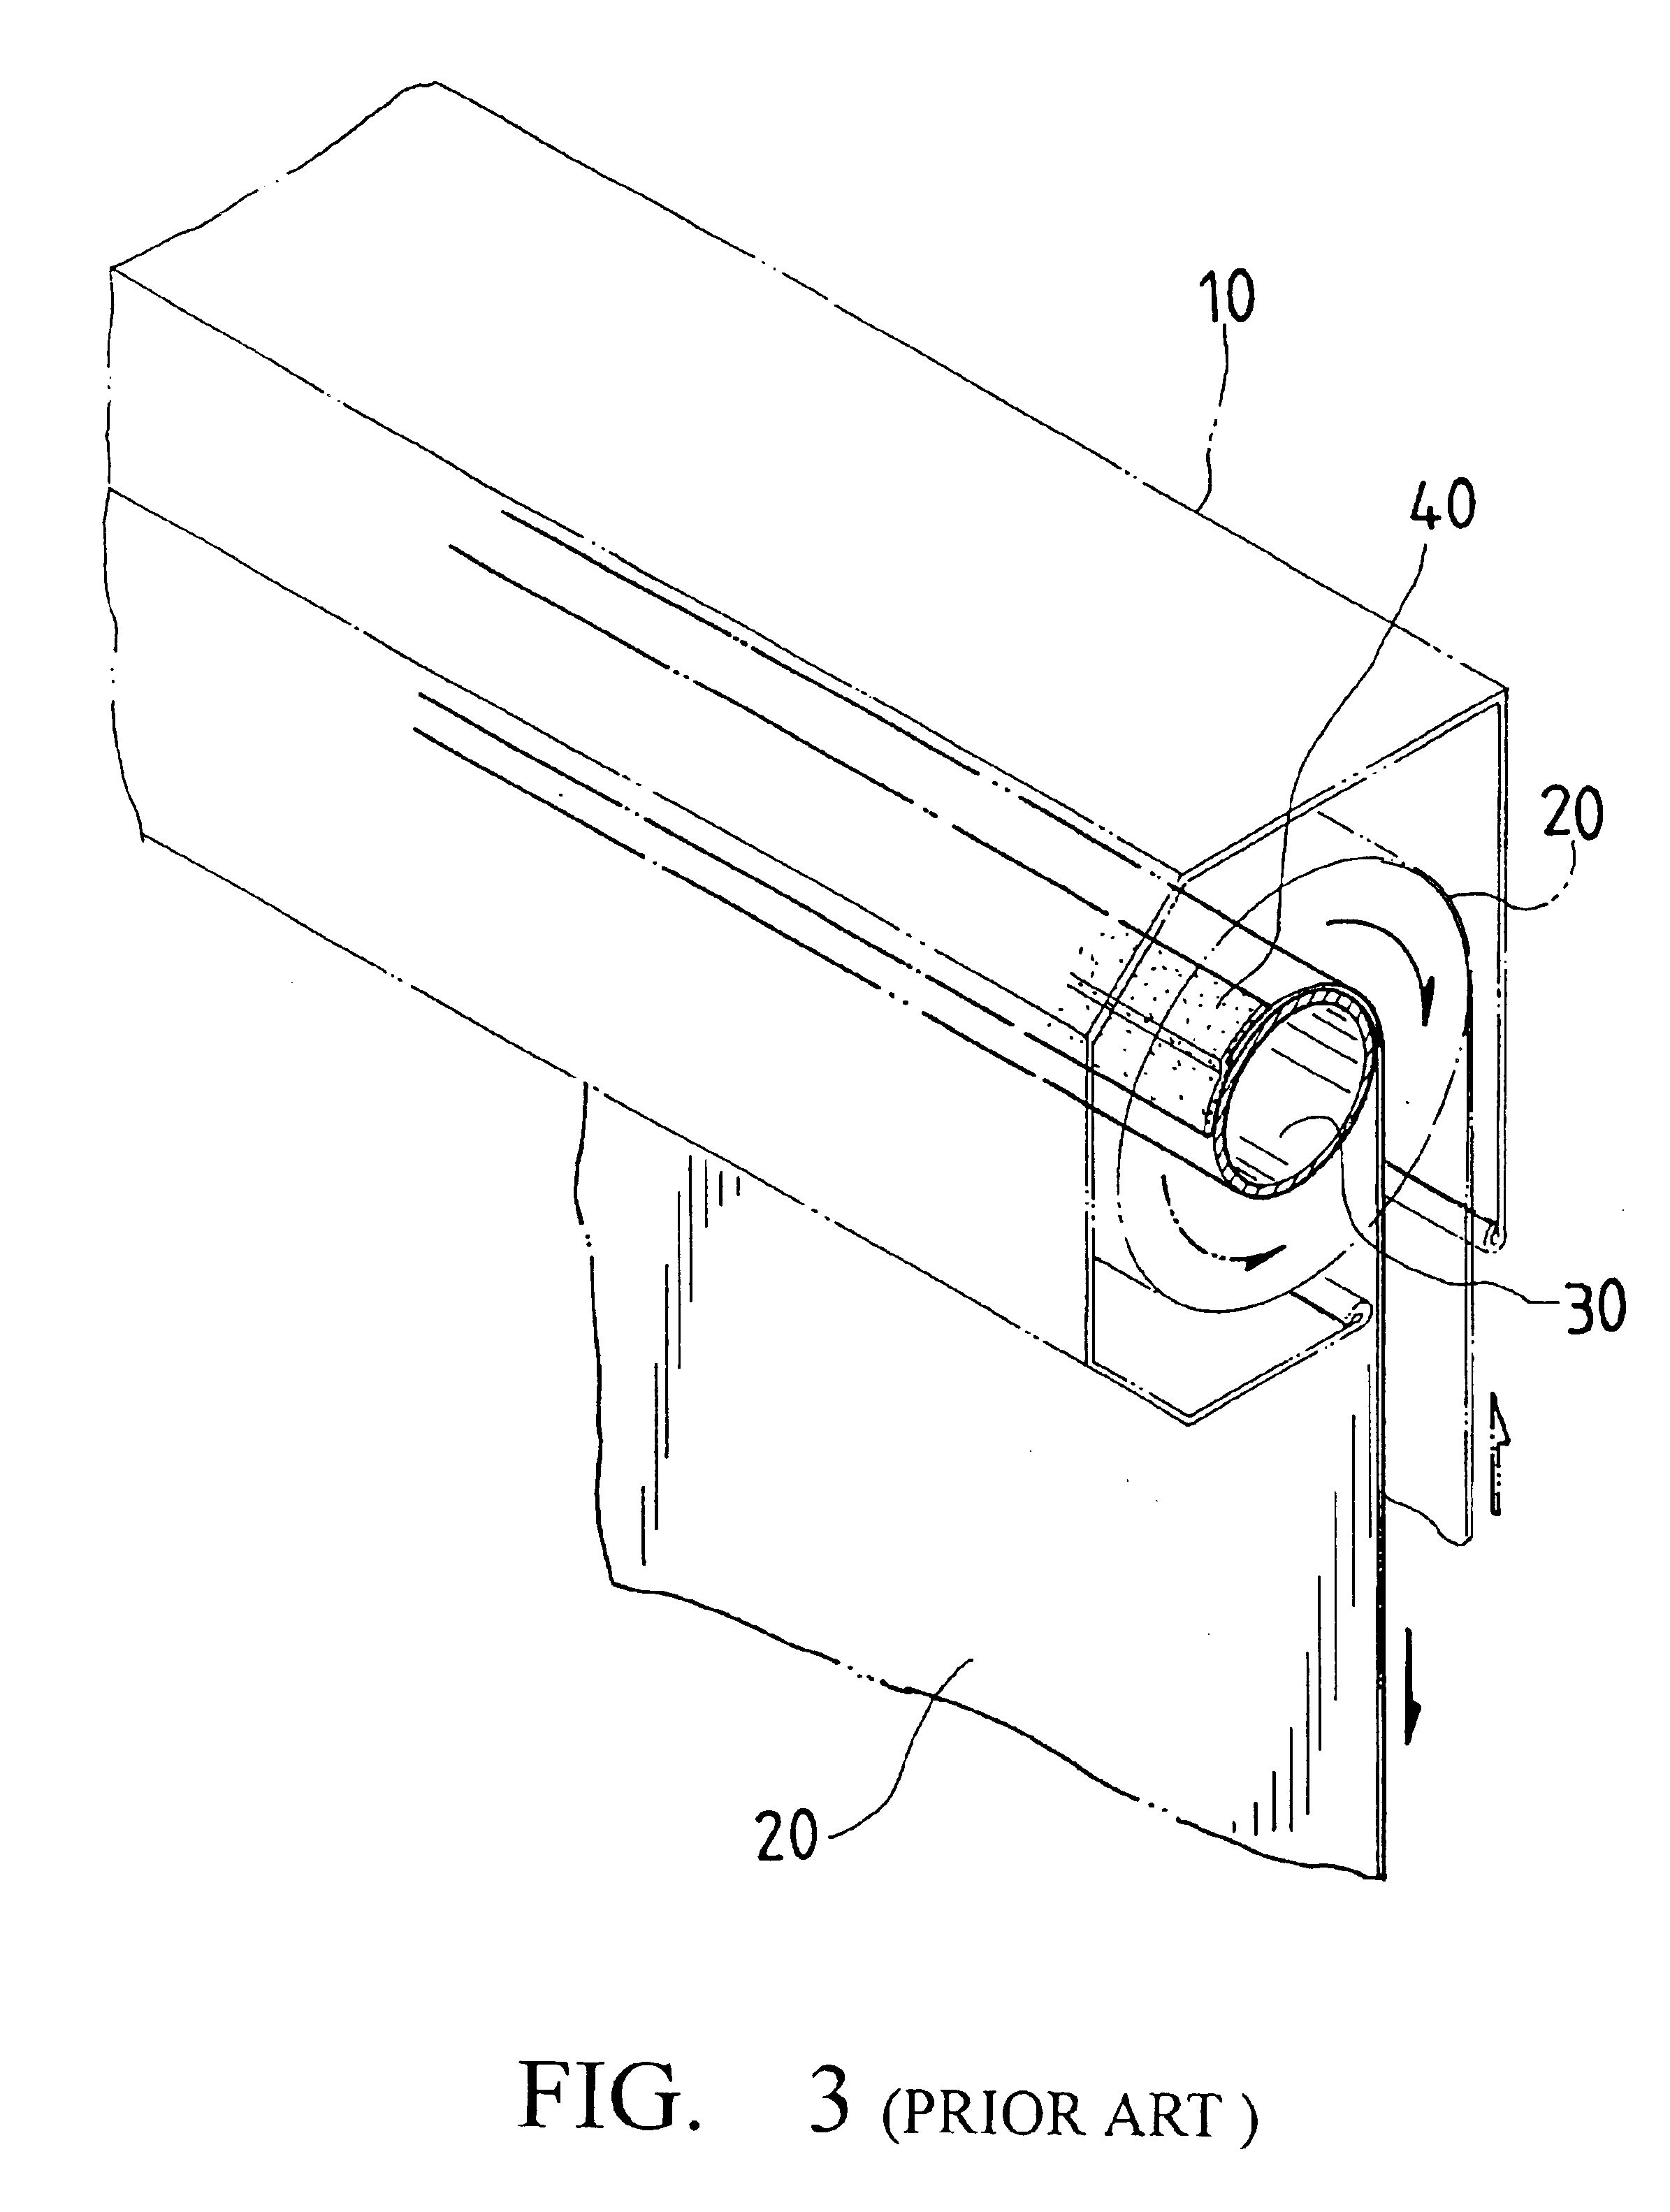 Electric projection screen roller and balance rod assembly